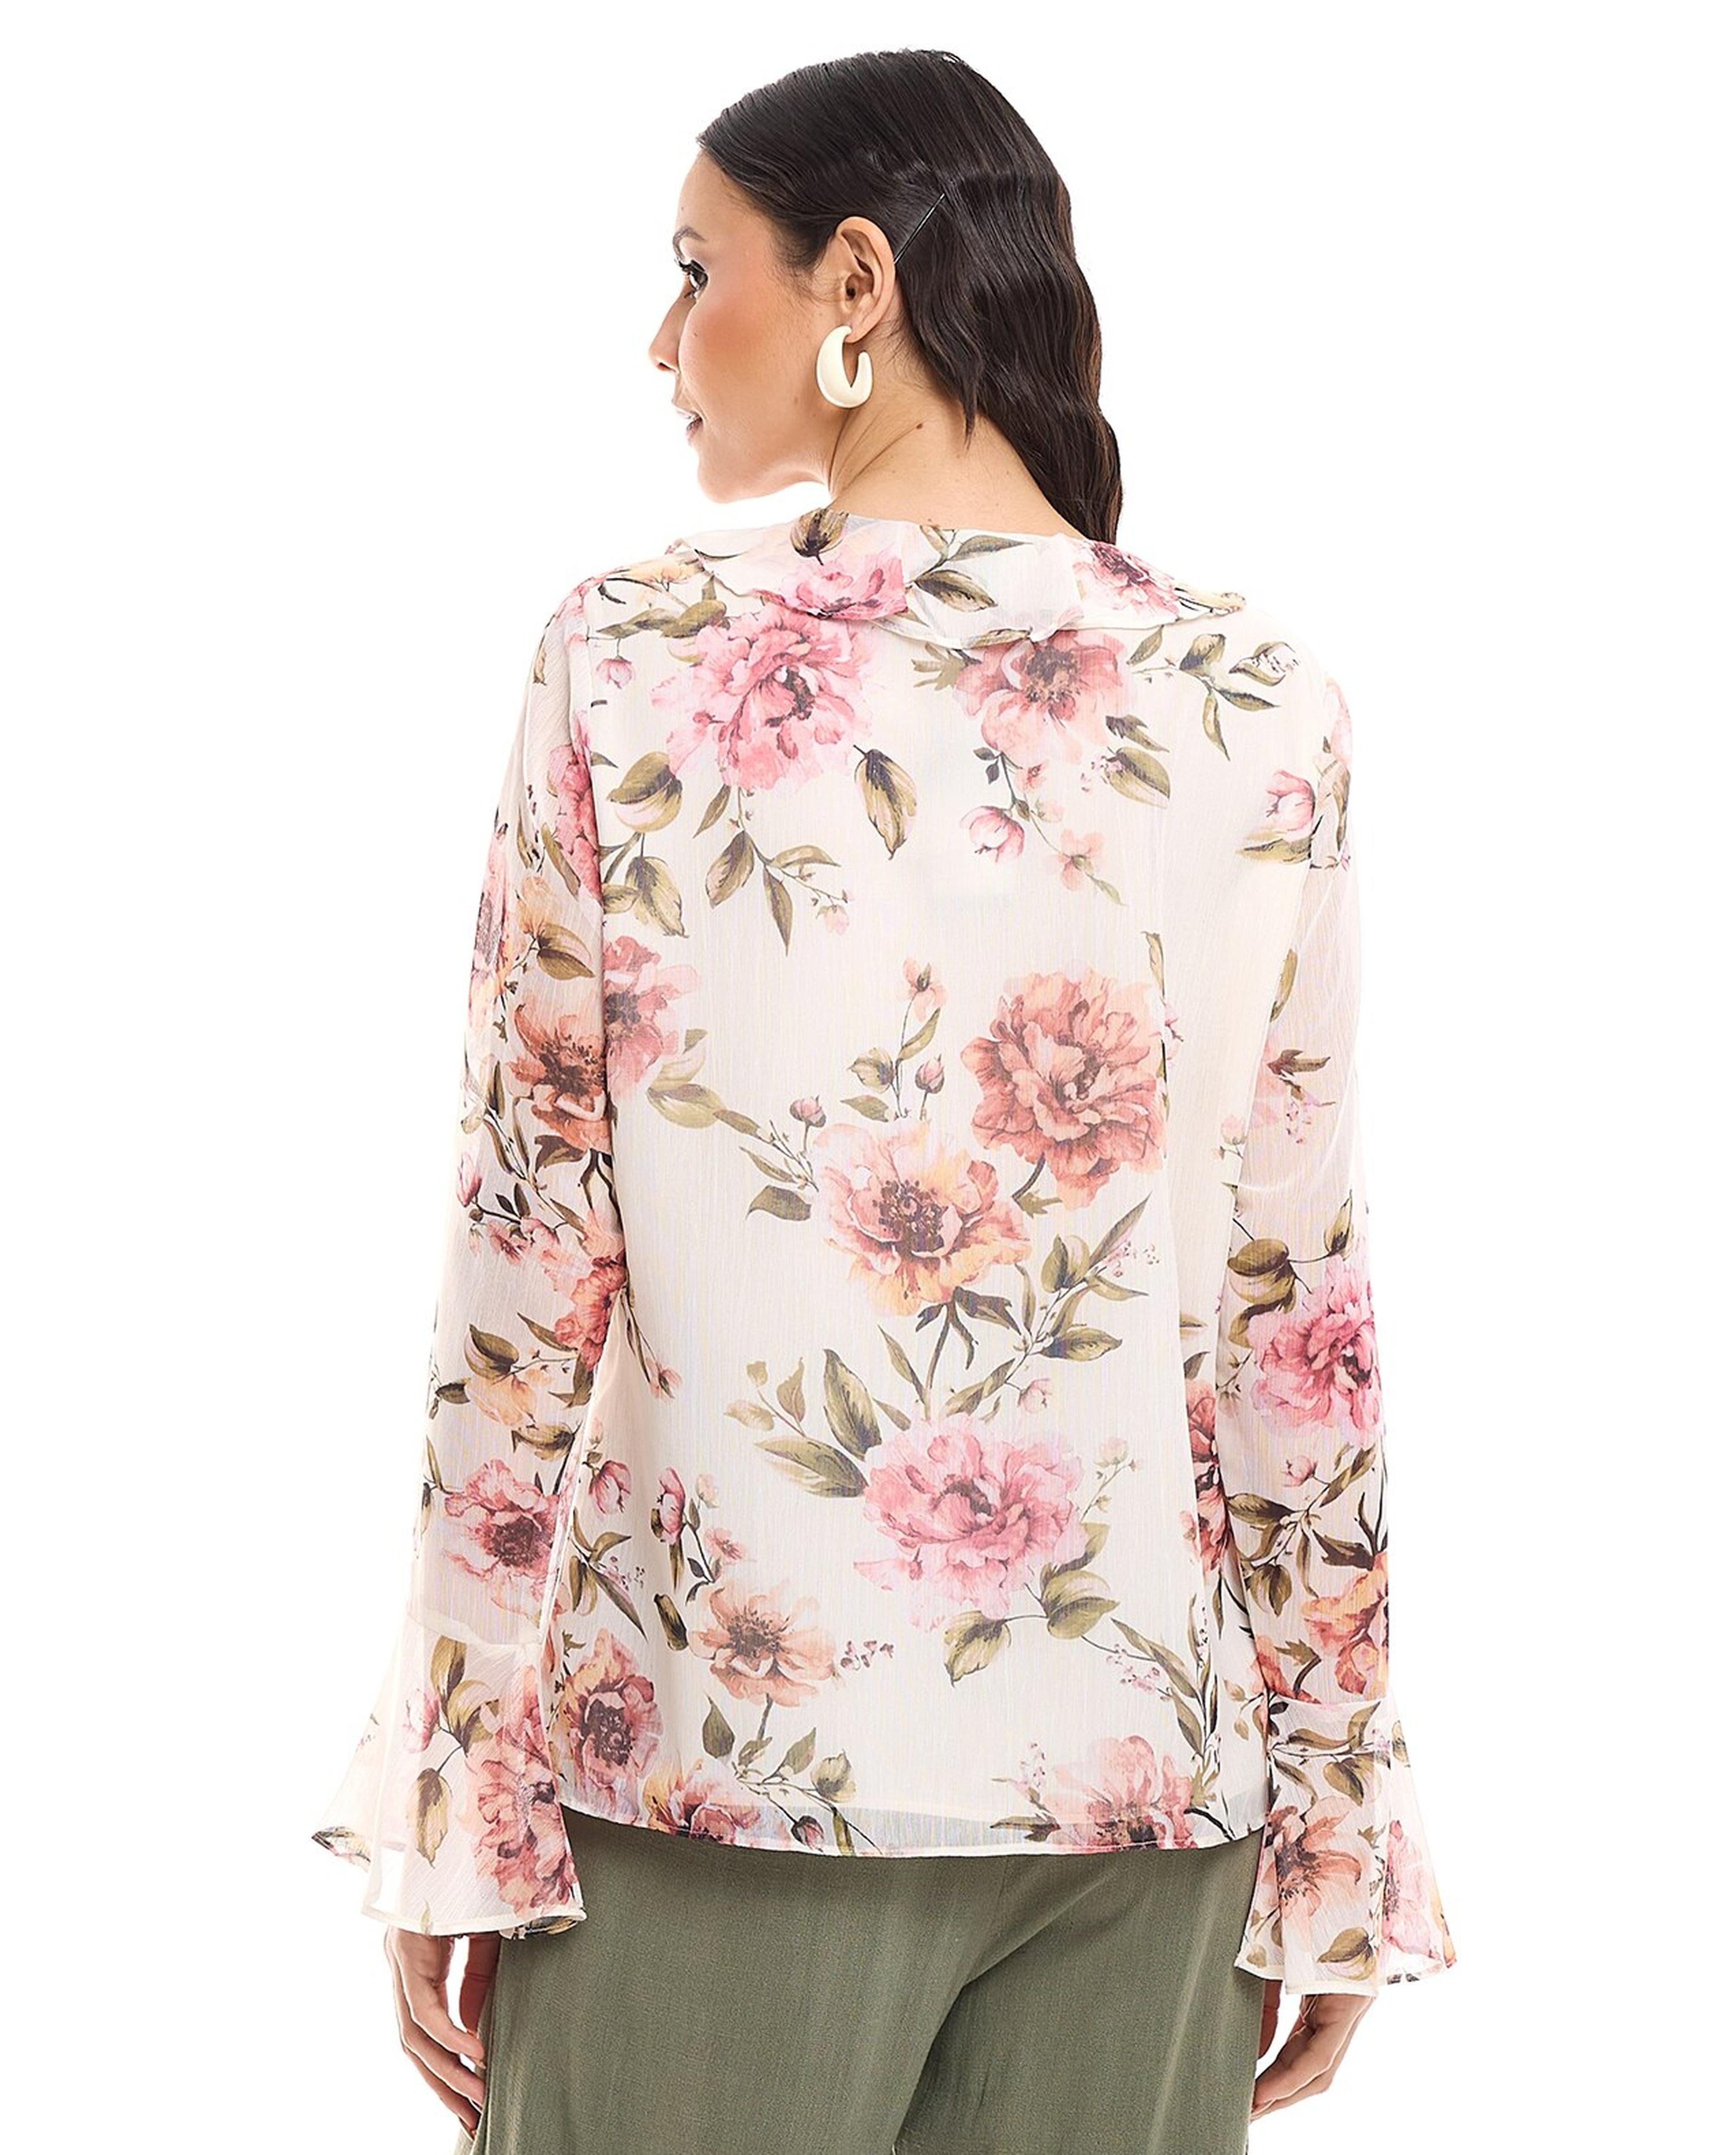 Floral Print Top with V-Neck and Flounce Sleeves